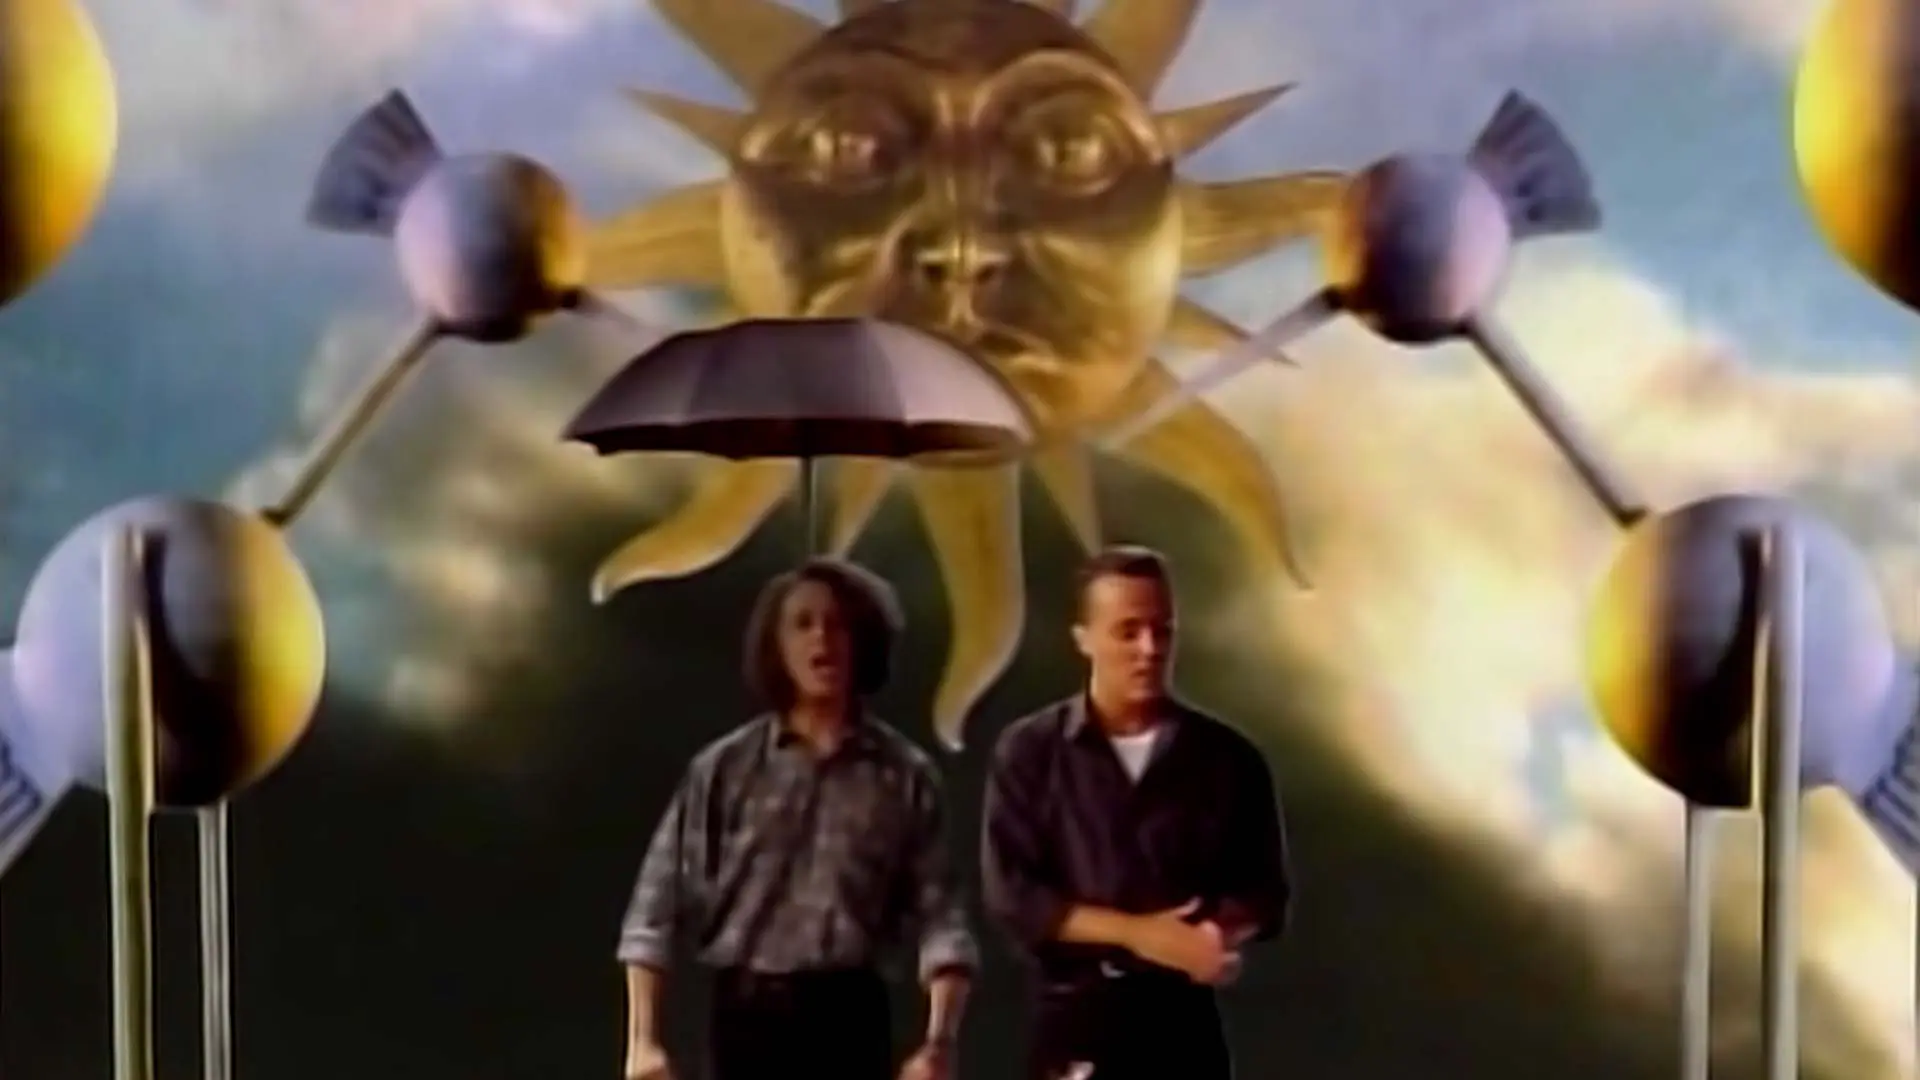 Tears for fears - Sowing the seeds of love.